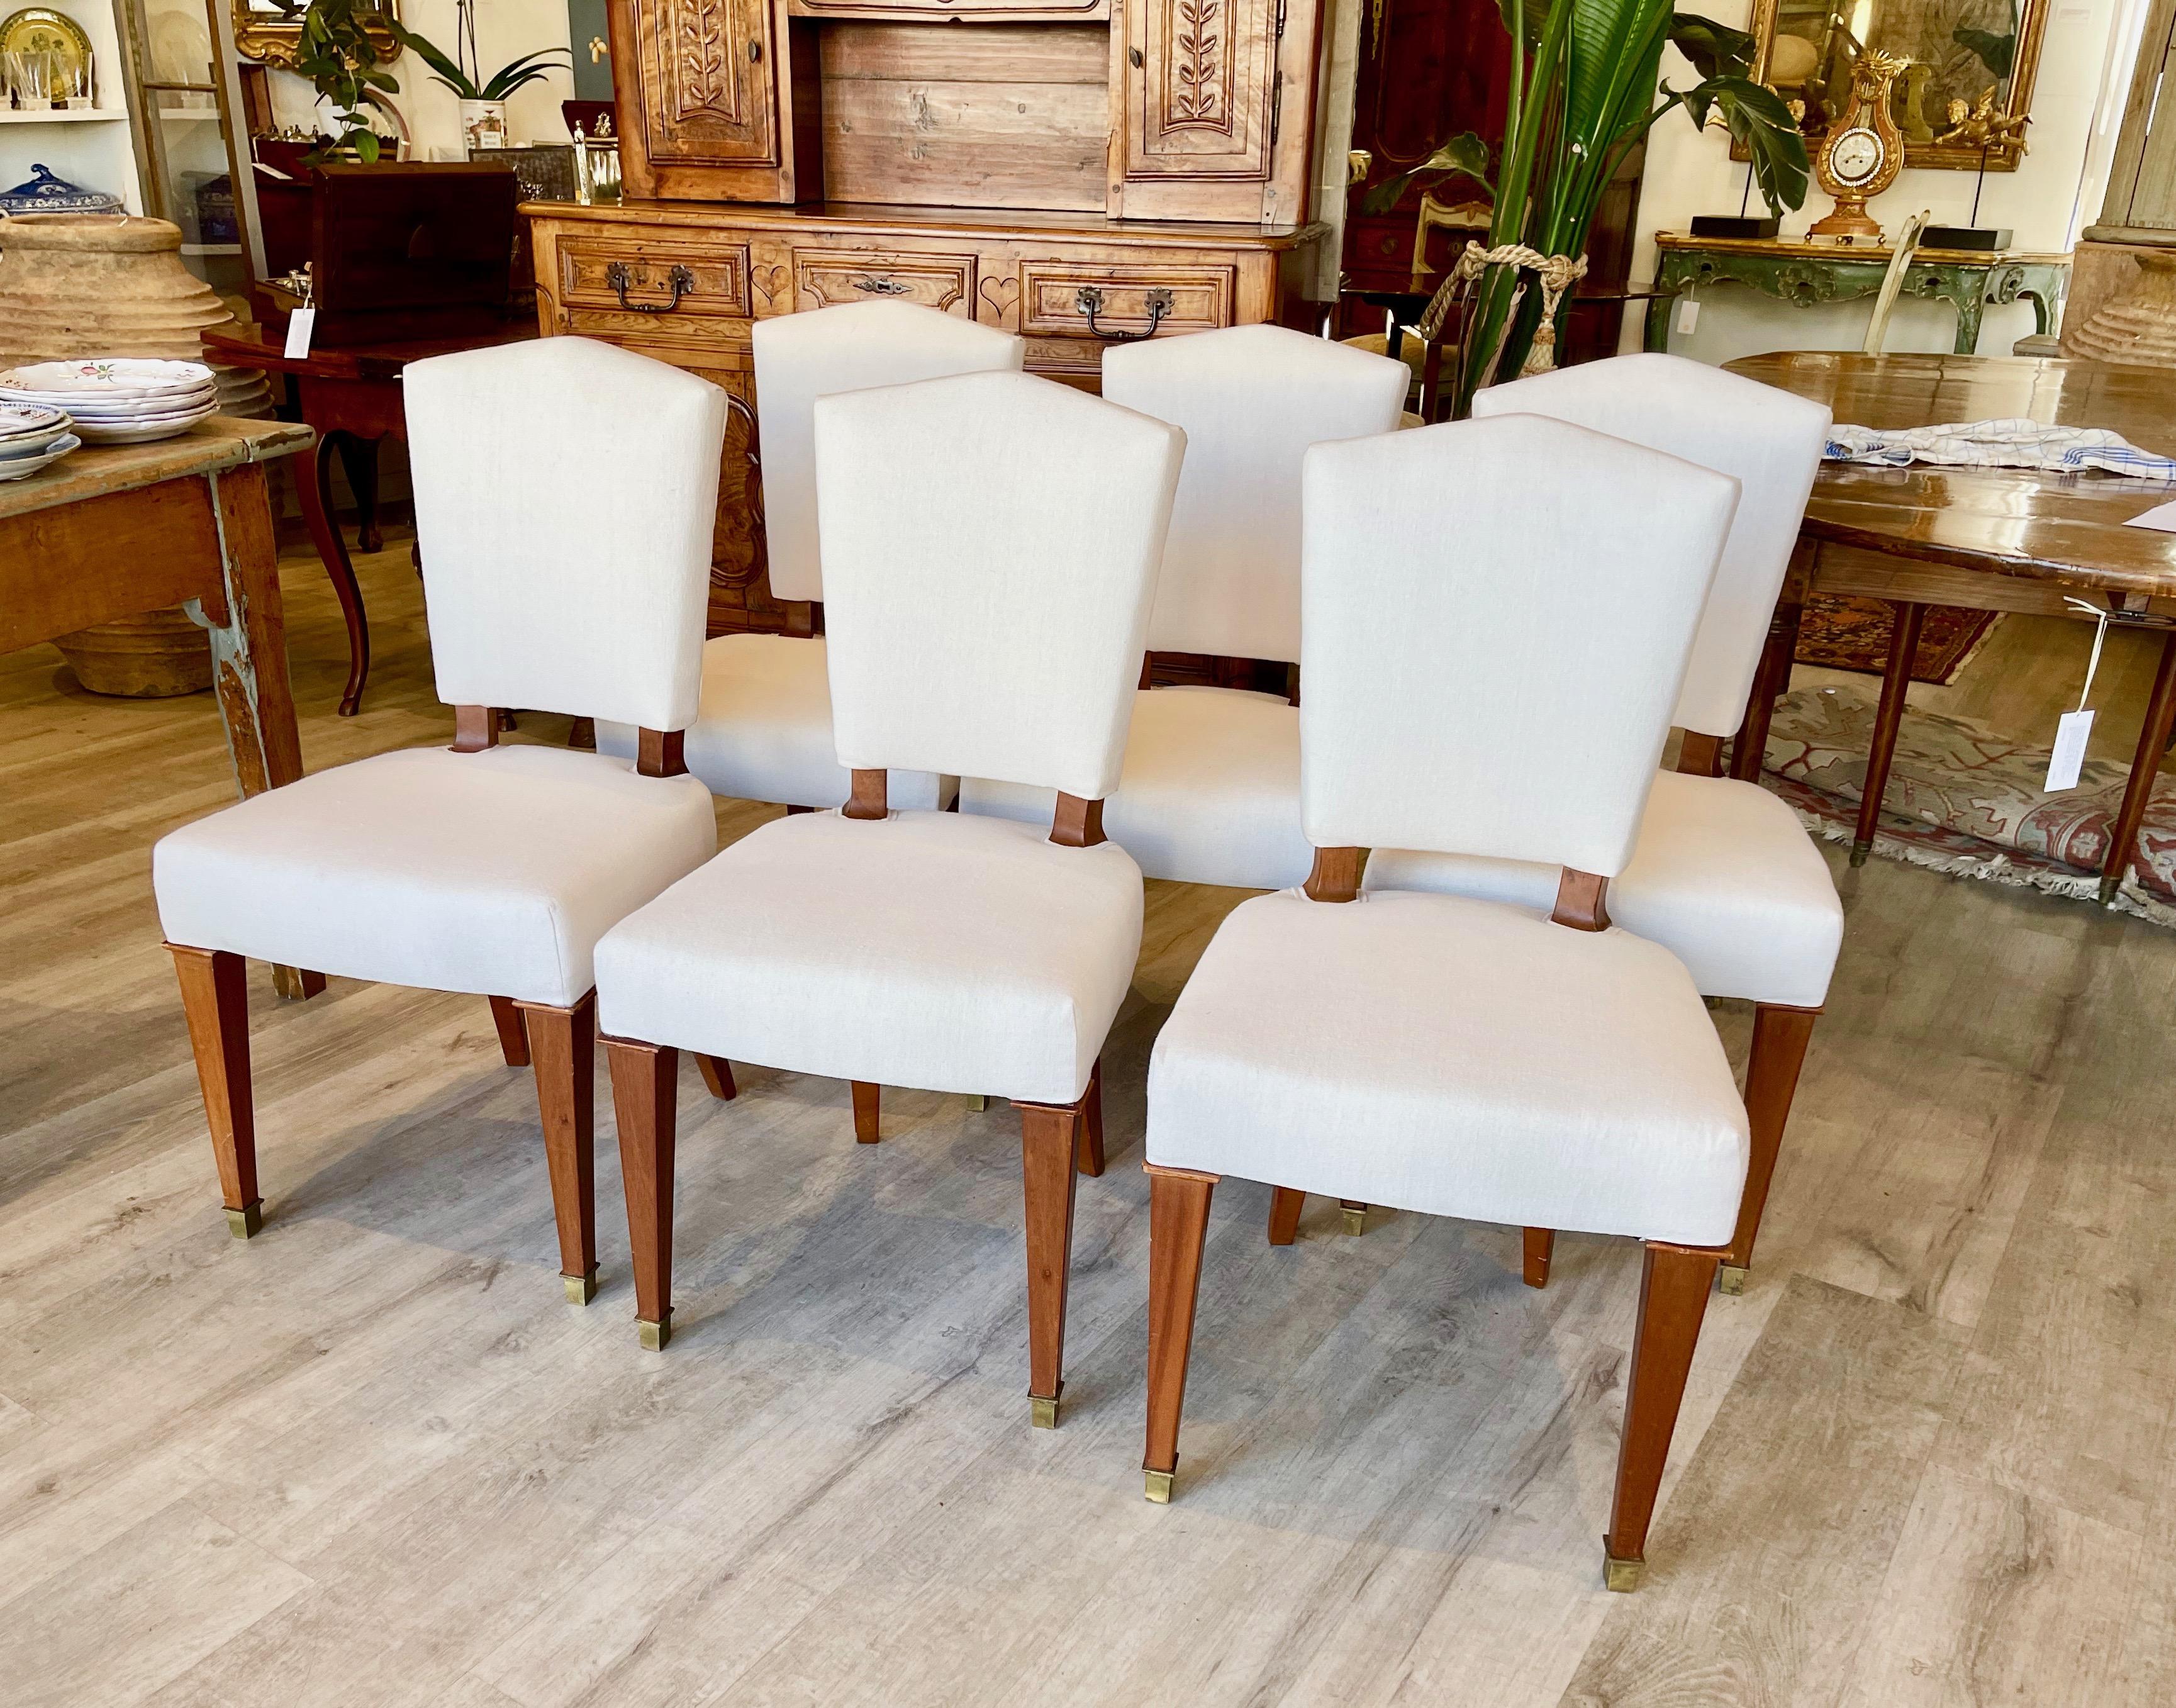 Six French Art Deco mahogany side chairs, circa 1930. From the estate of an important New York modernism dealer. Newly reupholstered in linen.  In excellent, stable condition.